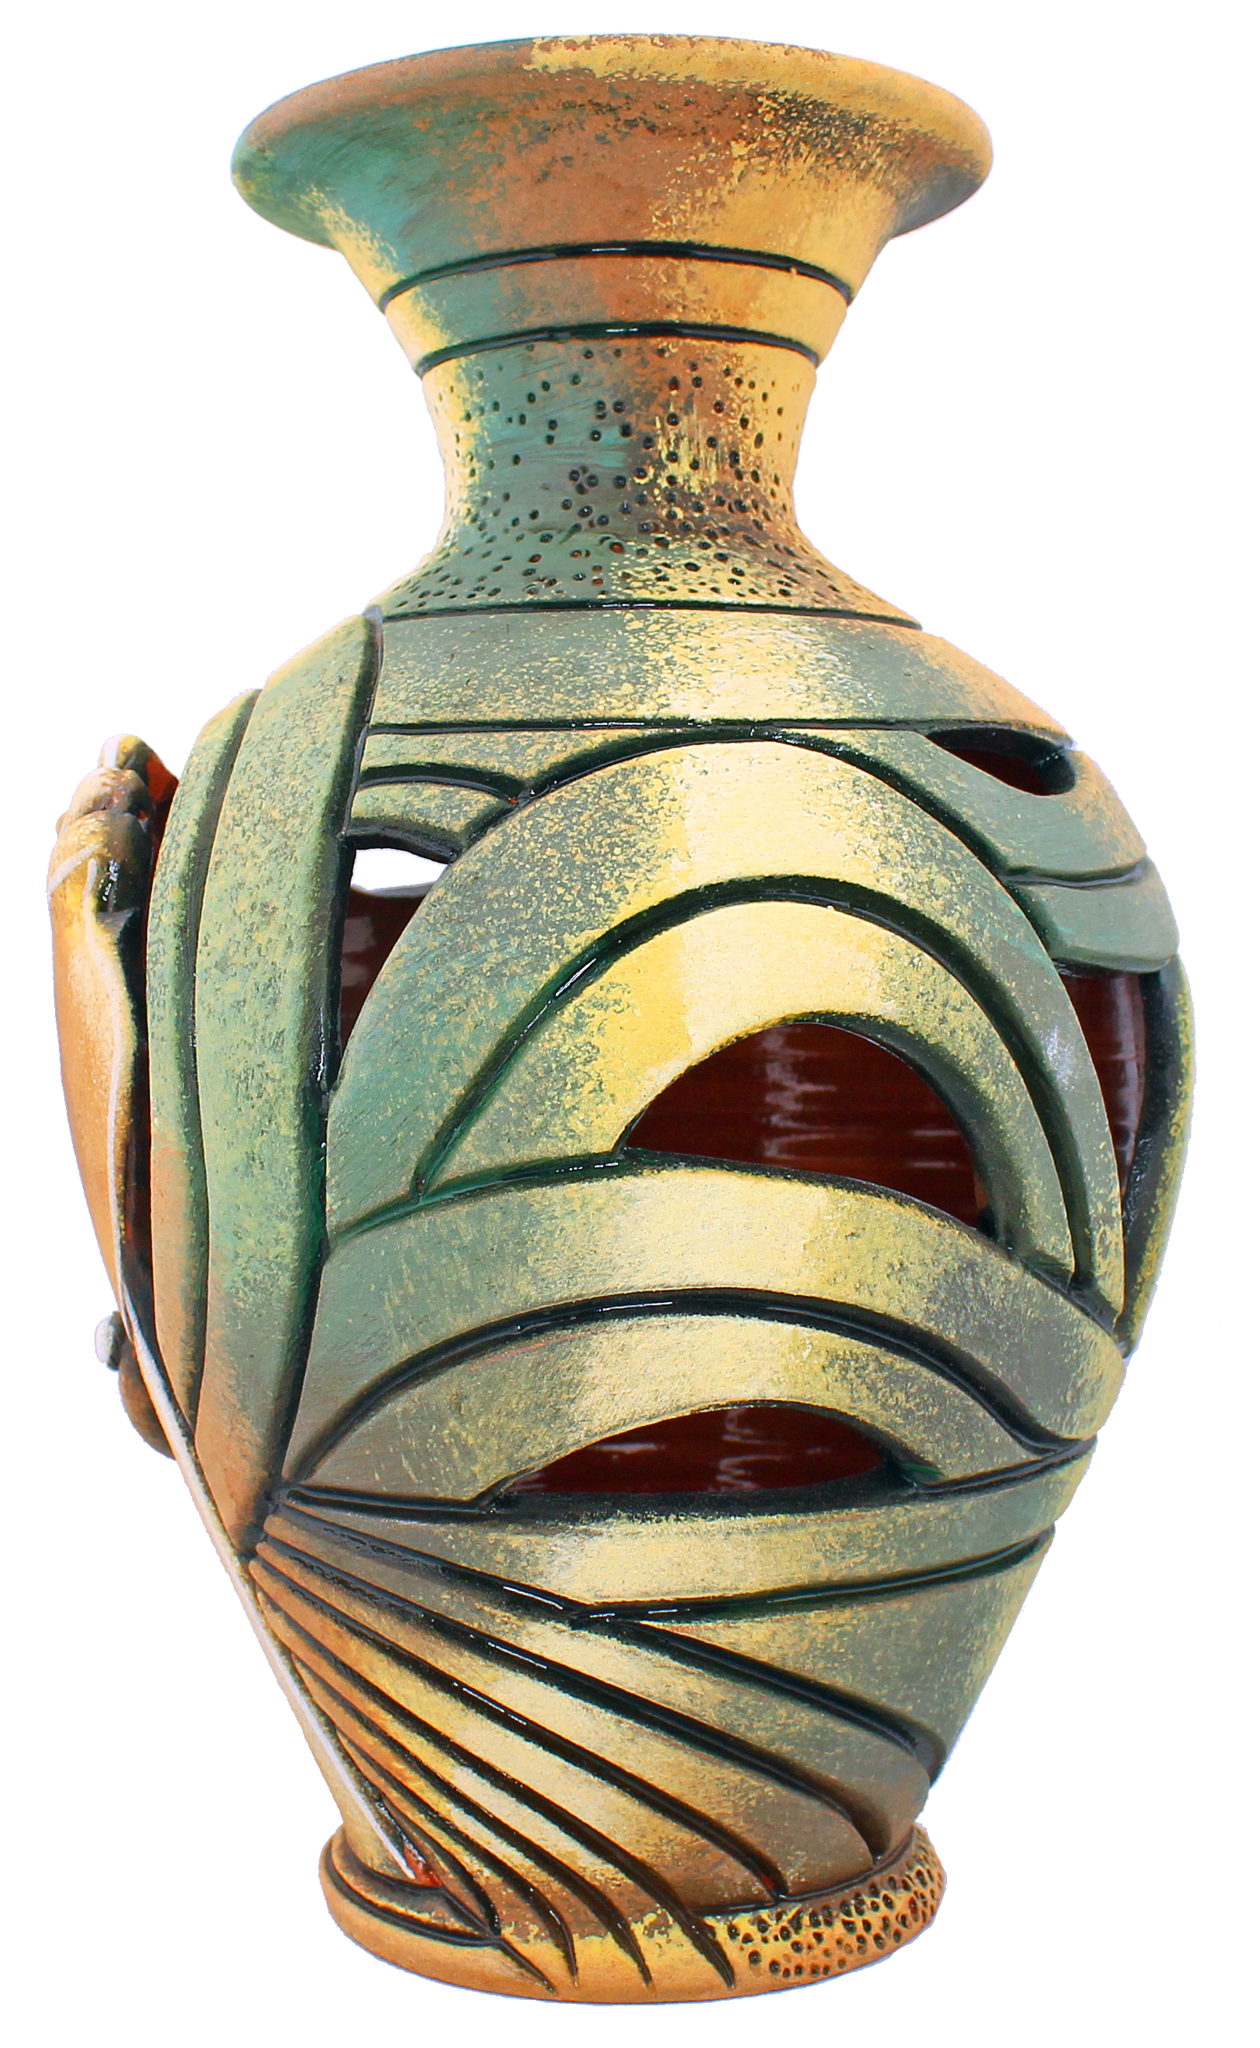 3D Bumpy Head Vase Series — Gold and Green Spiky Head